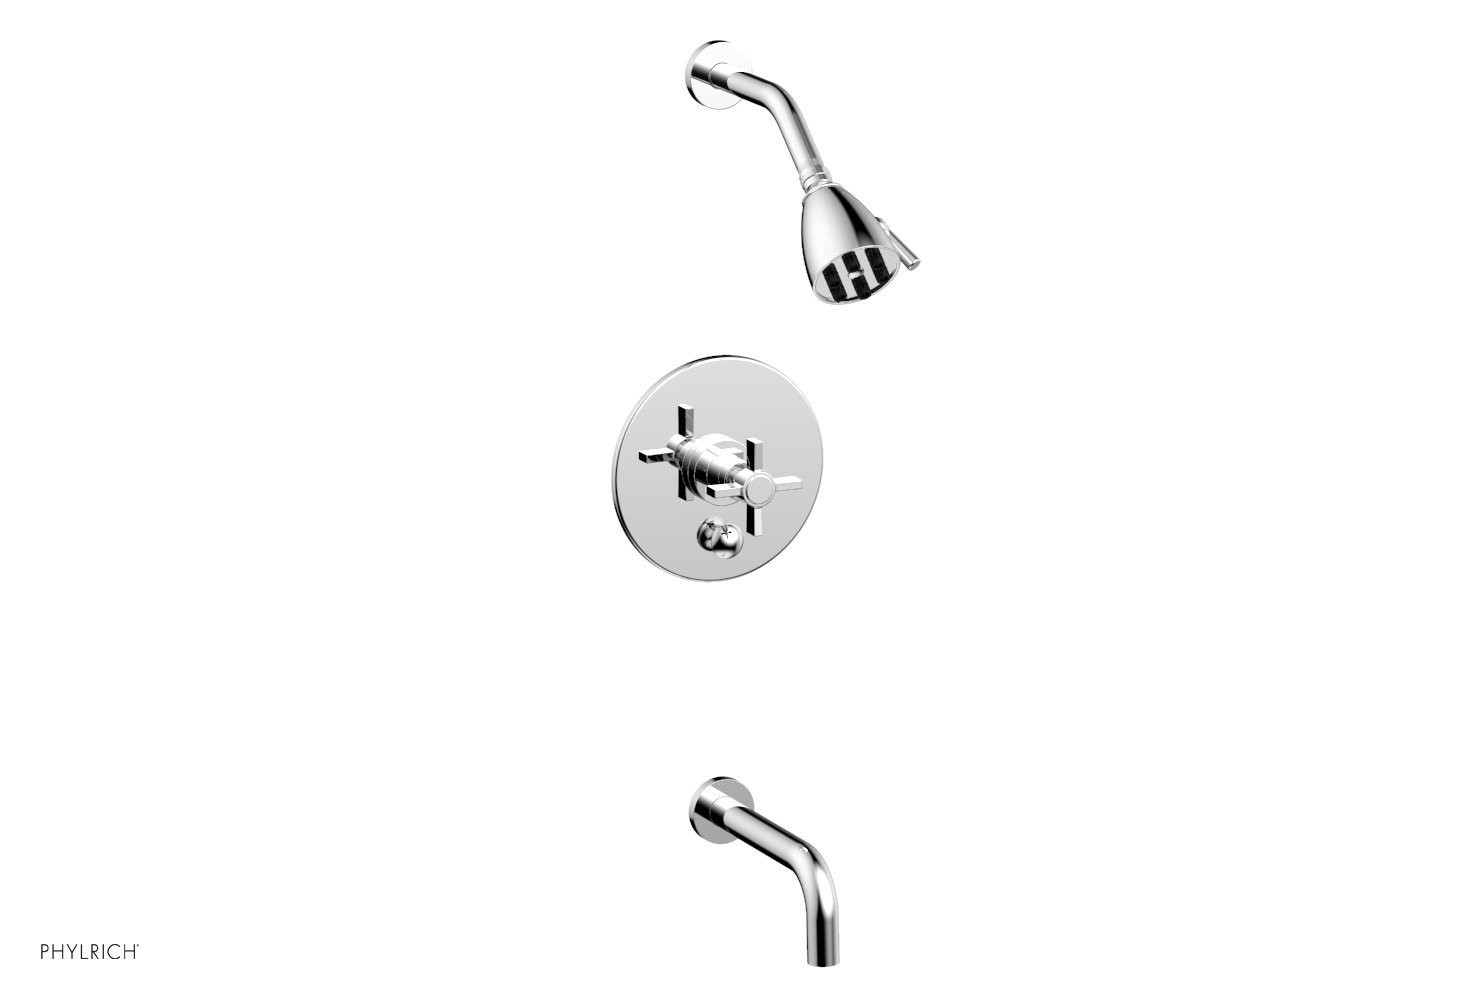 PHYLRICH DPB2137 BASIC WALL MOUNT PRESSURE BALANCE TUB AND SHOWER SET WITH BLADE CROSS HANDLE